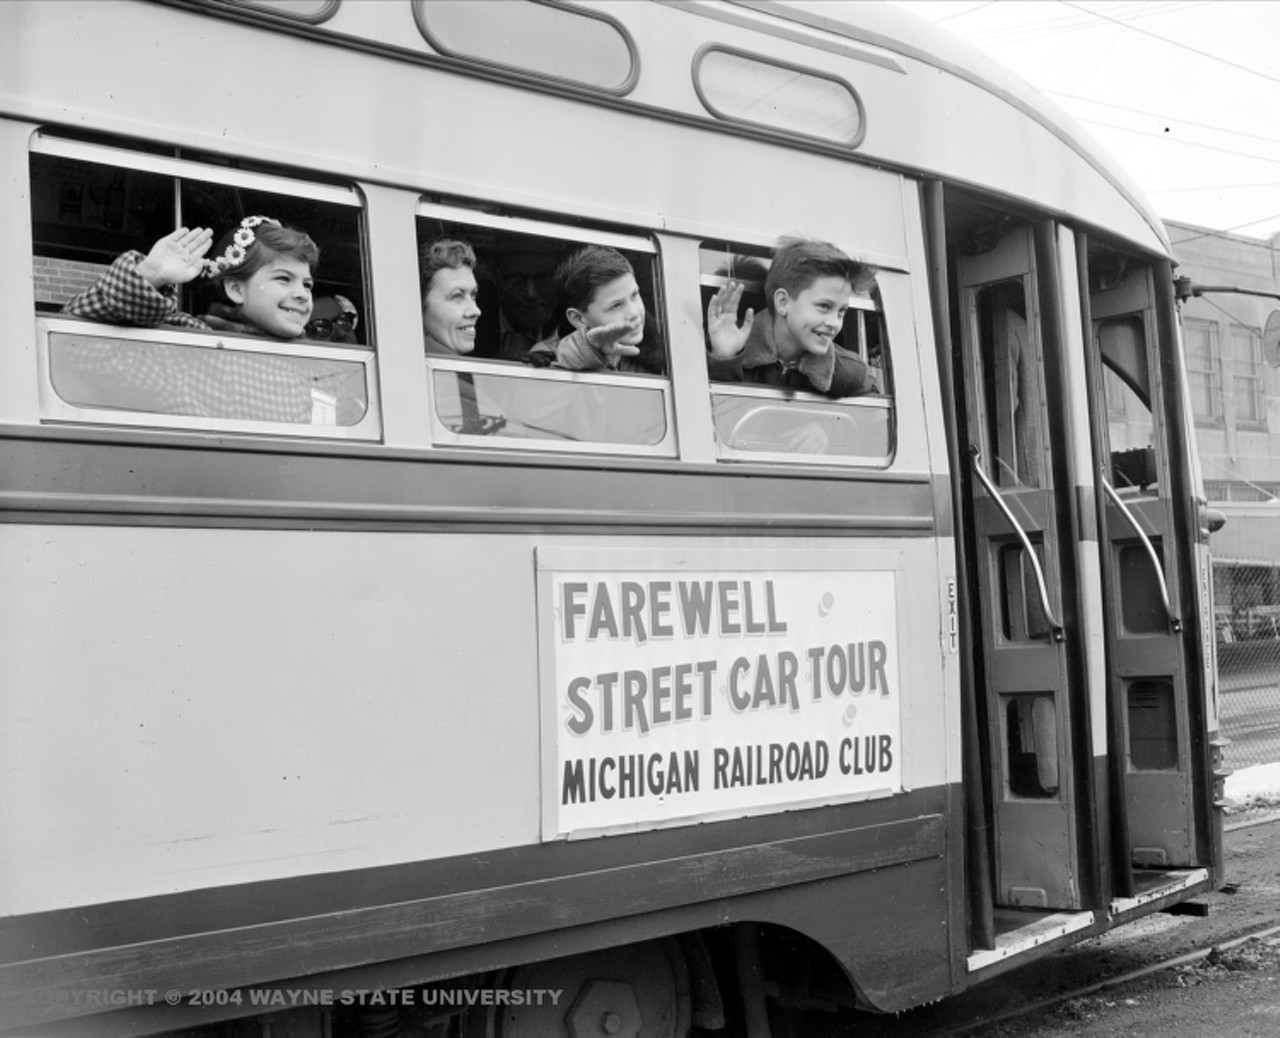 On April 8, 1956, the last streetcar in Detroit rolled down Woodward Avenue. After less than 10 years in service, Detroit's fleet of streamlined streetcars was loaded on railcars and shipped to Mexico City, where they ran for another 30 years. Schramm notes, "They might have lasted even longer if Mexico City hadn't lost 40 or 50 of them in earthquakes."